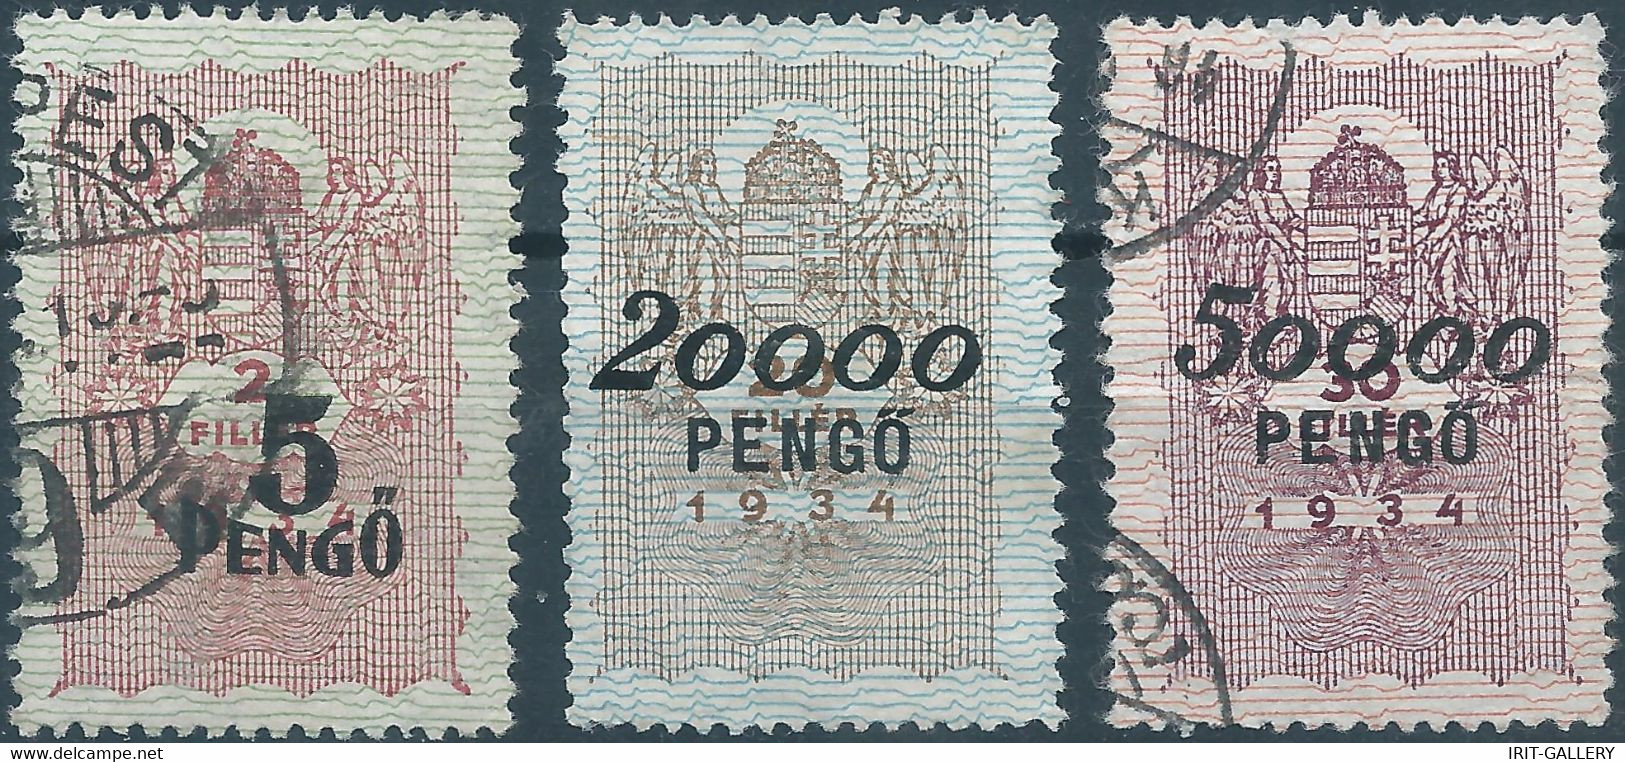 Hungary1945 Revenue Stamps Fiscal Tax For Bill Of Exchange,Overprint On Stamps Of The1934-5Pengo & 20000 And 50000PENGO, - Fiscales